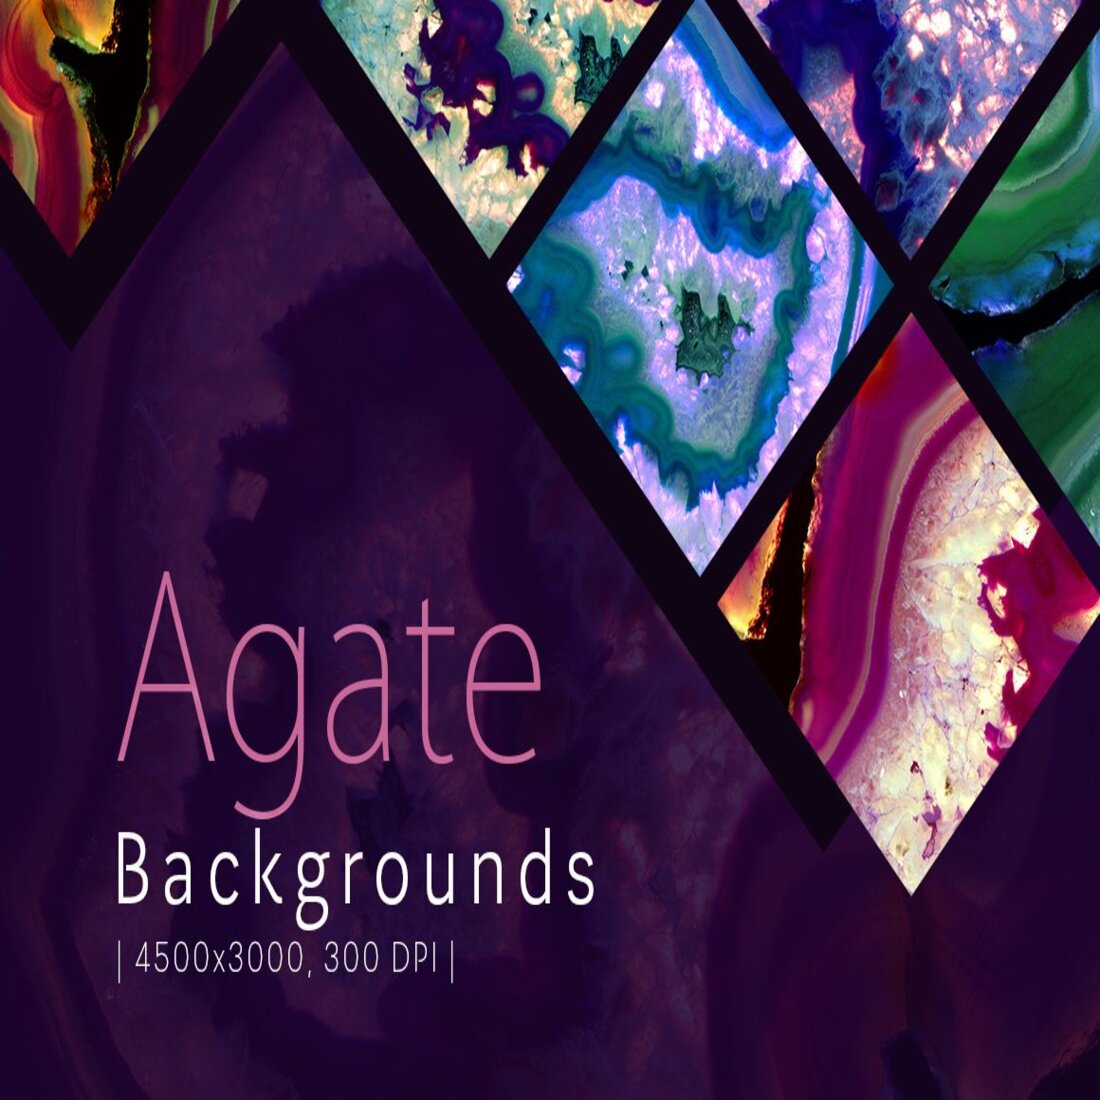 40 Agate Backgrounds cover.